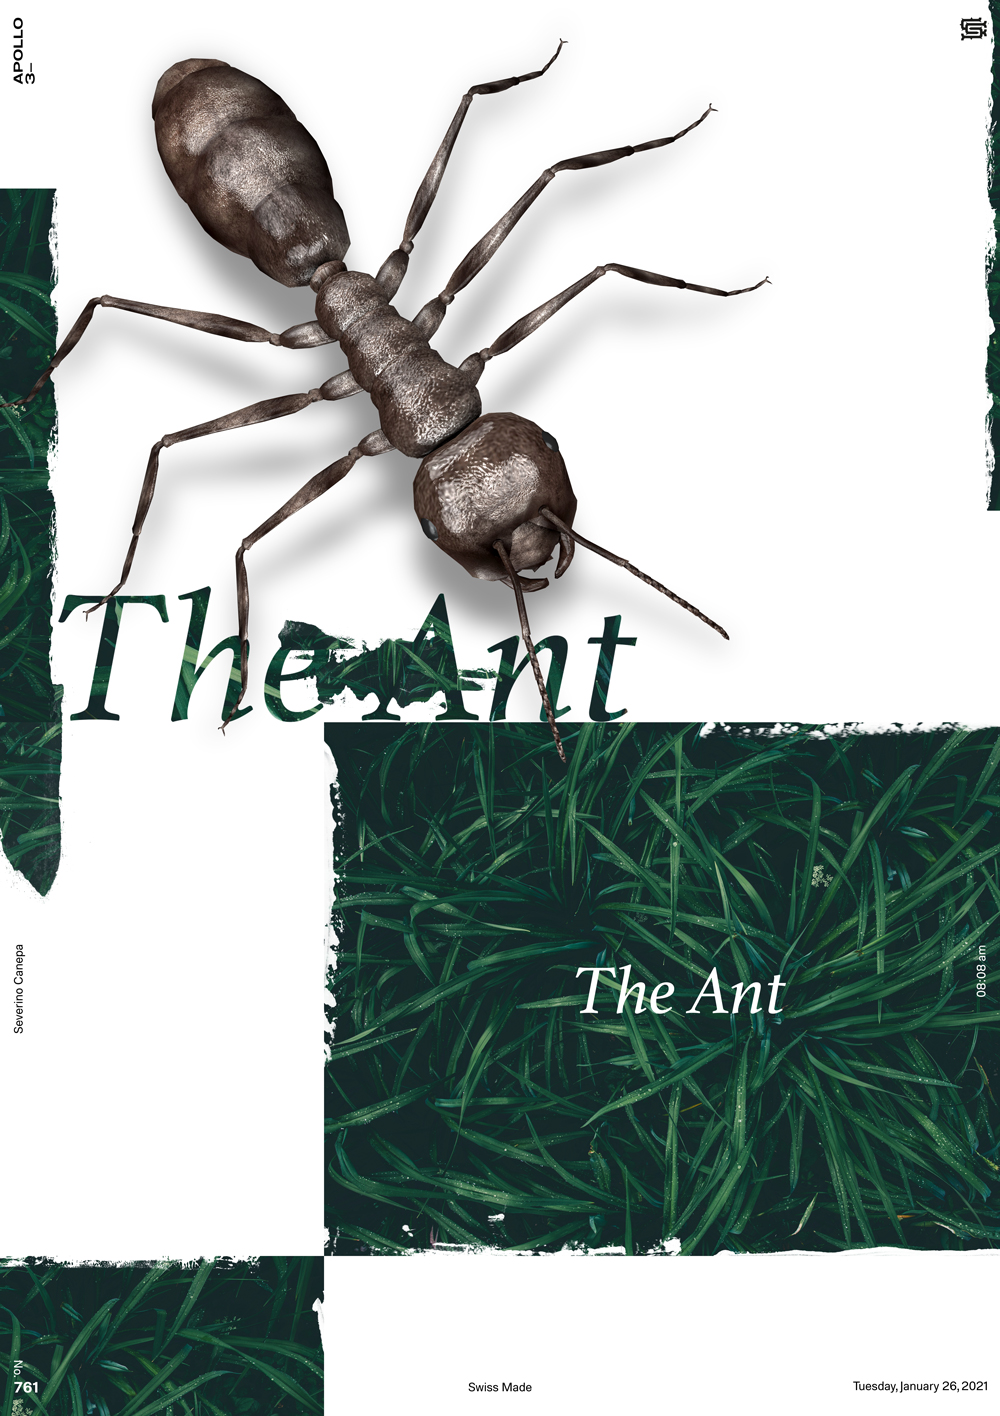 Digital creation mixing a 3D ant and the photograph of grass view from the top